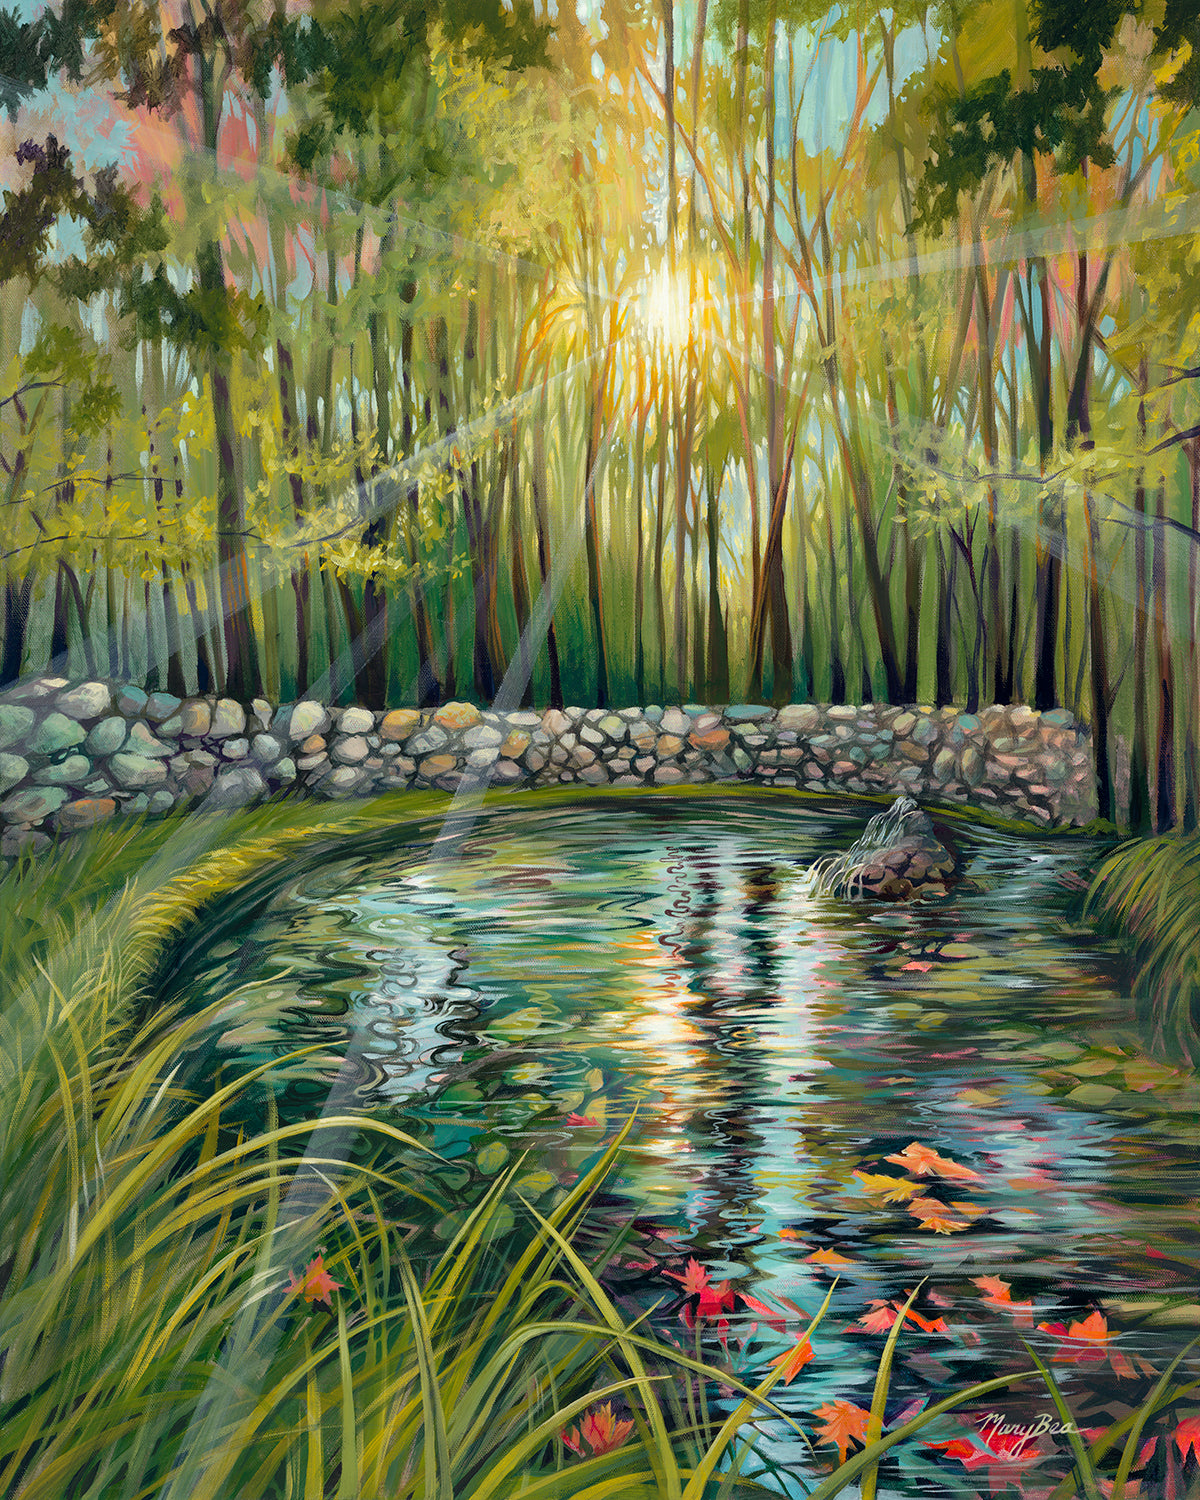 "Sunlit Spring" Giclee Canvas Reproduction